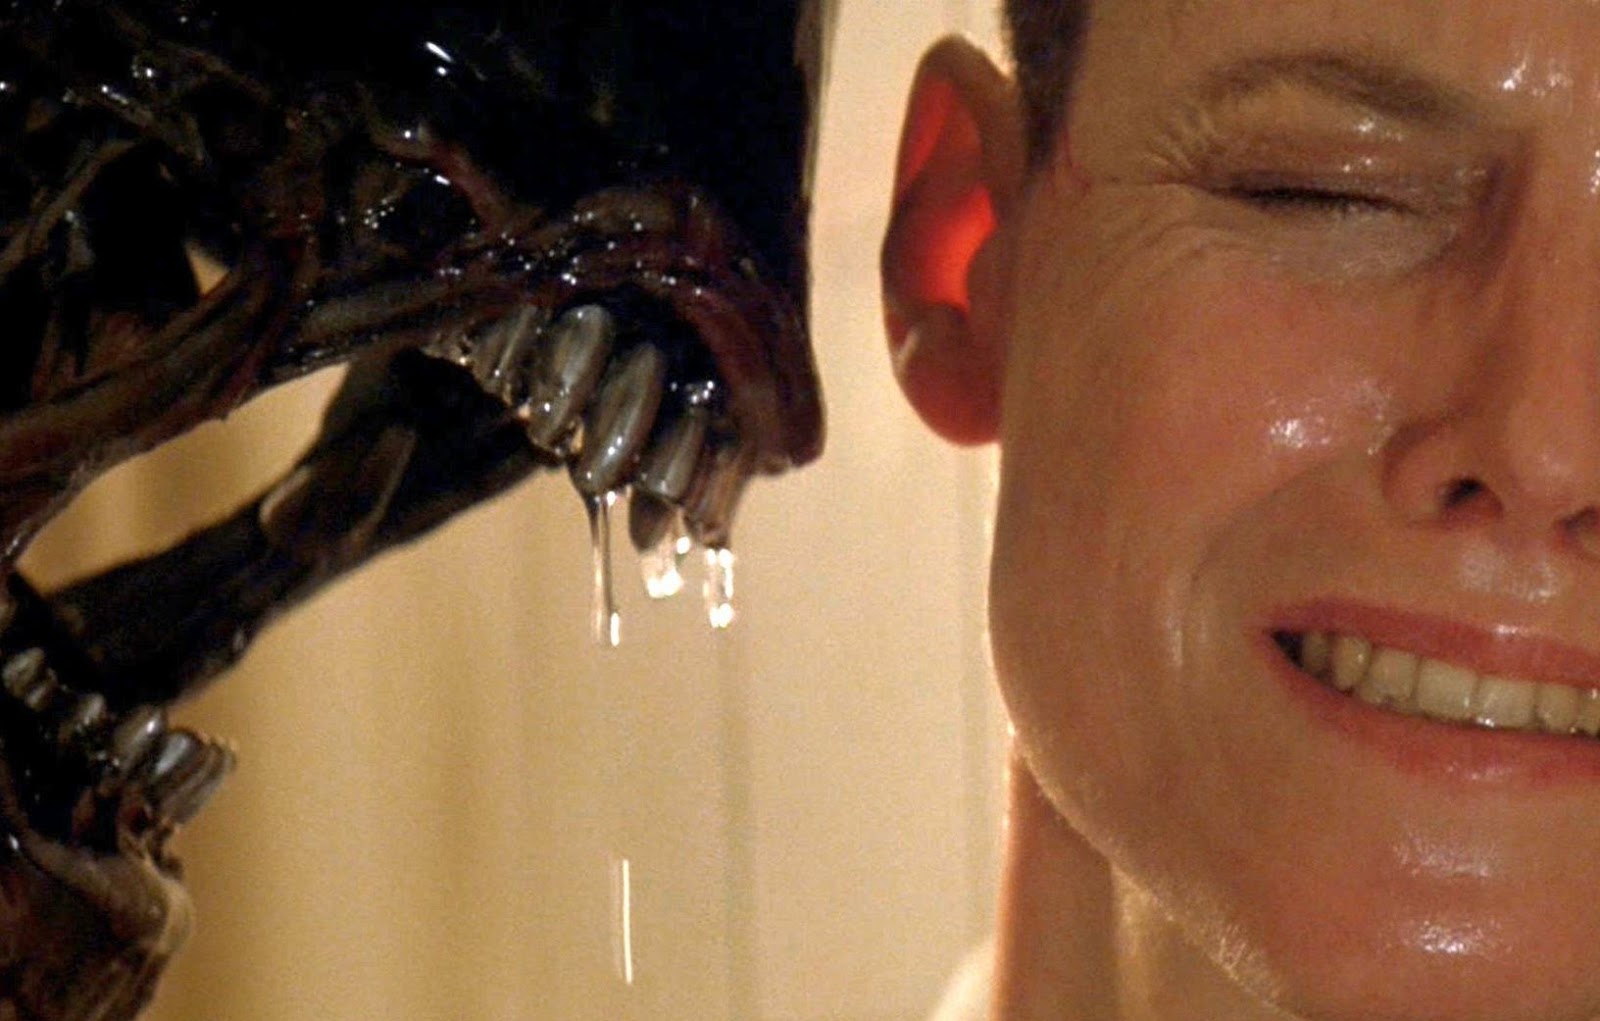 ALIEN" FILM FRANCHISE: RANKED FROM WORST TO BEST